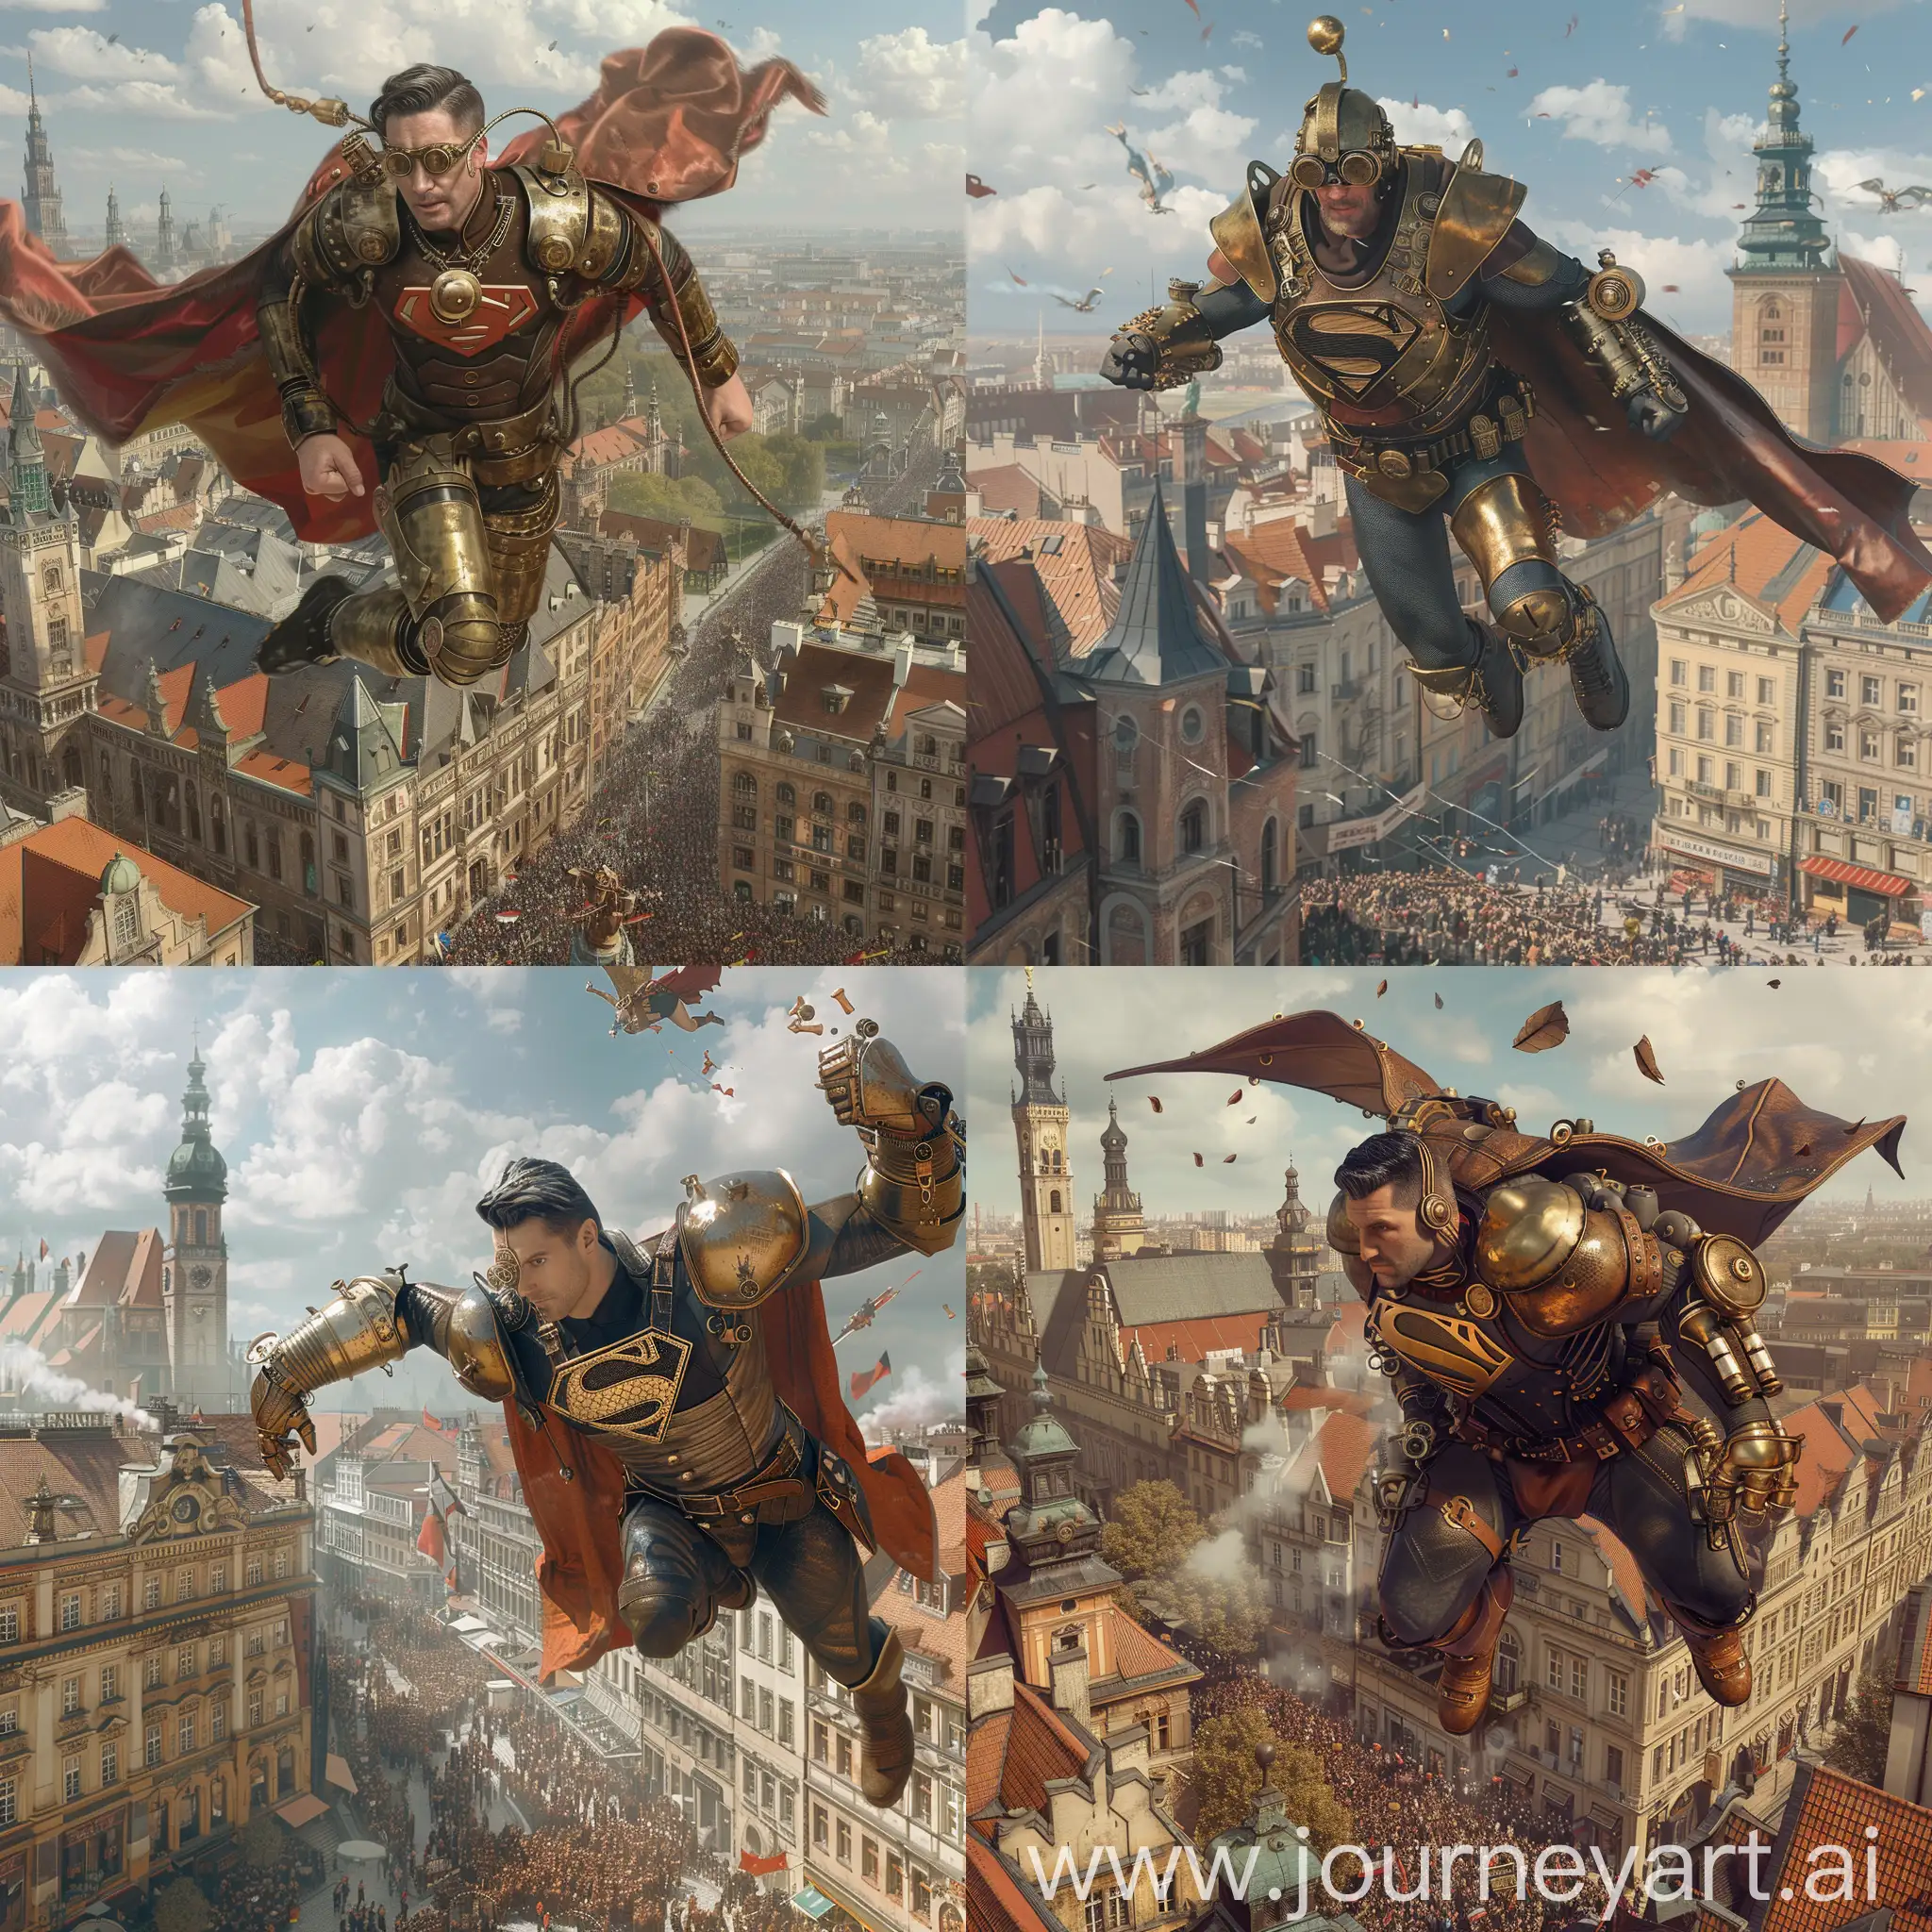 In a steampunk-infused Warsaw, a version of Wojciech Szczęsny dons a Superman costume made of brass and leather, flying over the city's Neo-Gothic architecture as fans cheer on a football triumph below, blending the old with the fantastical in a detailed 8K resolution.